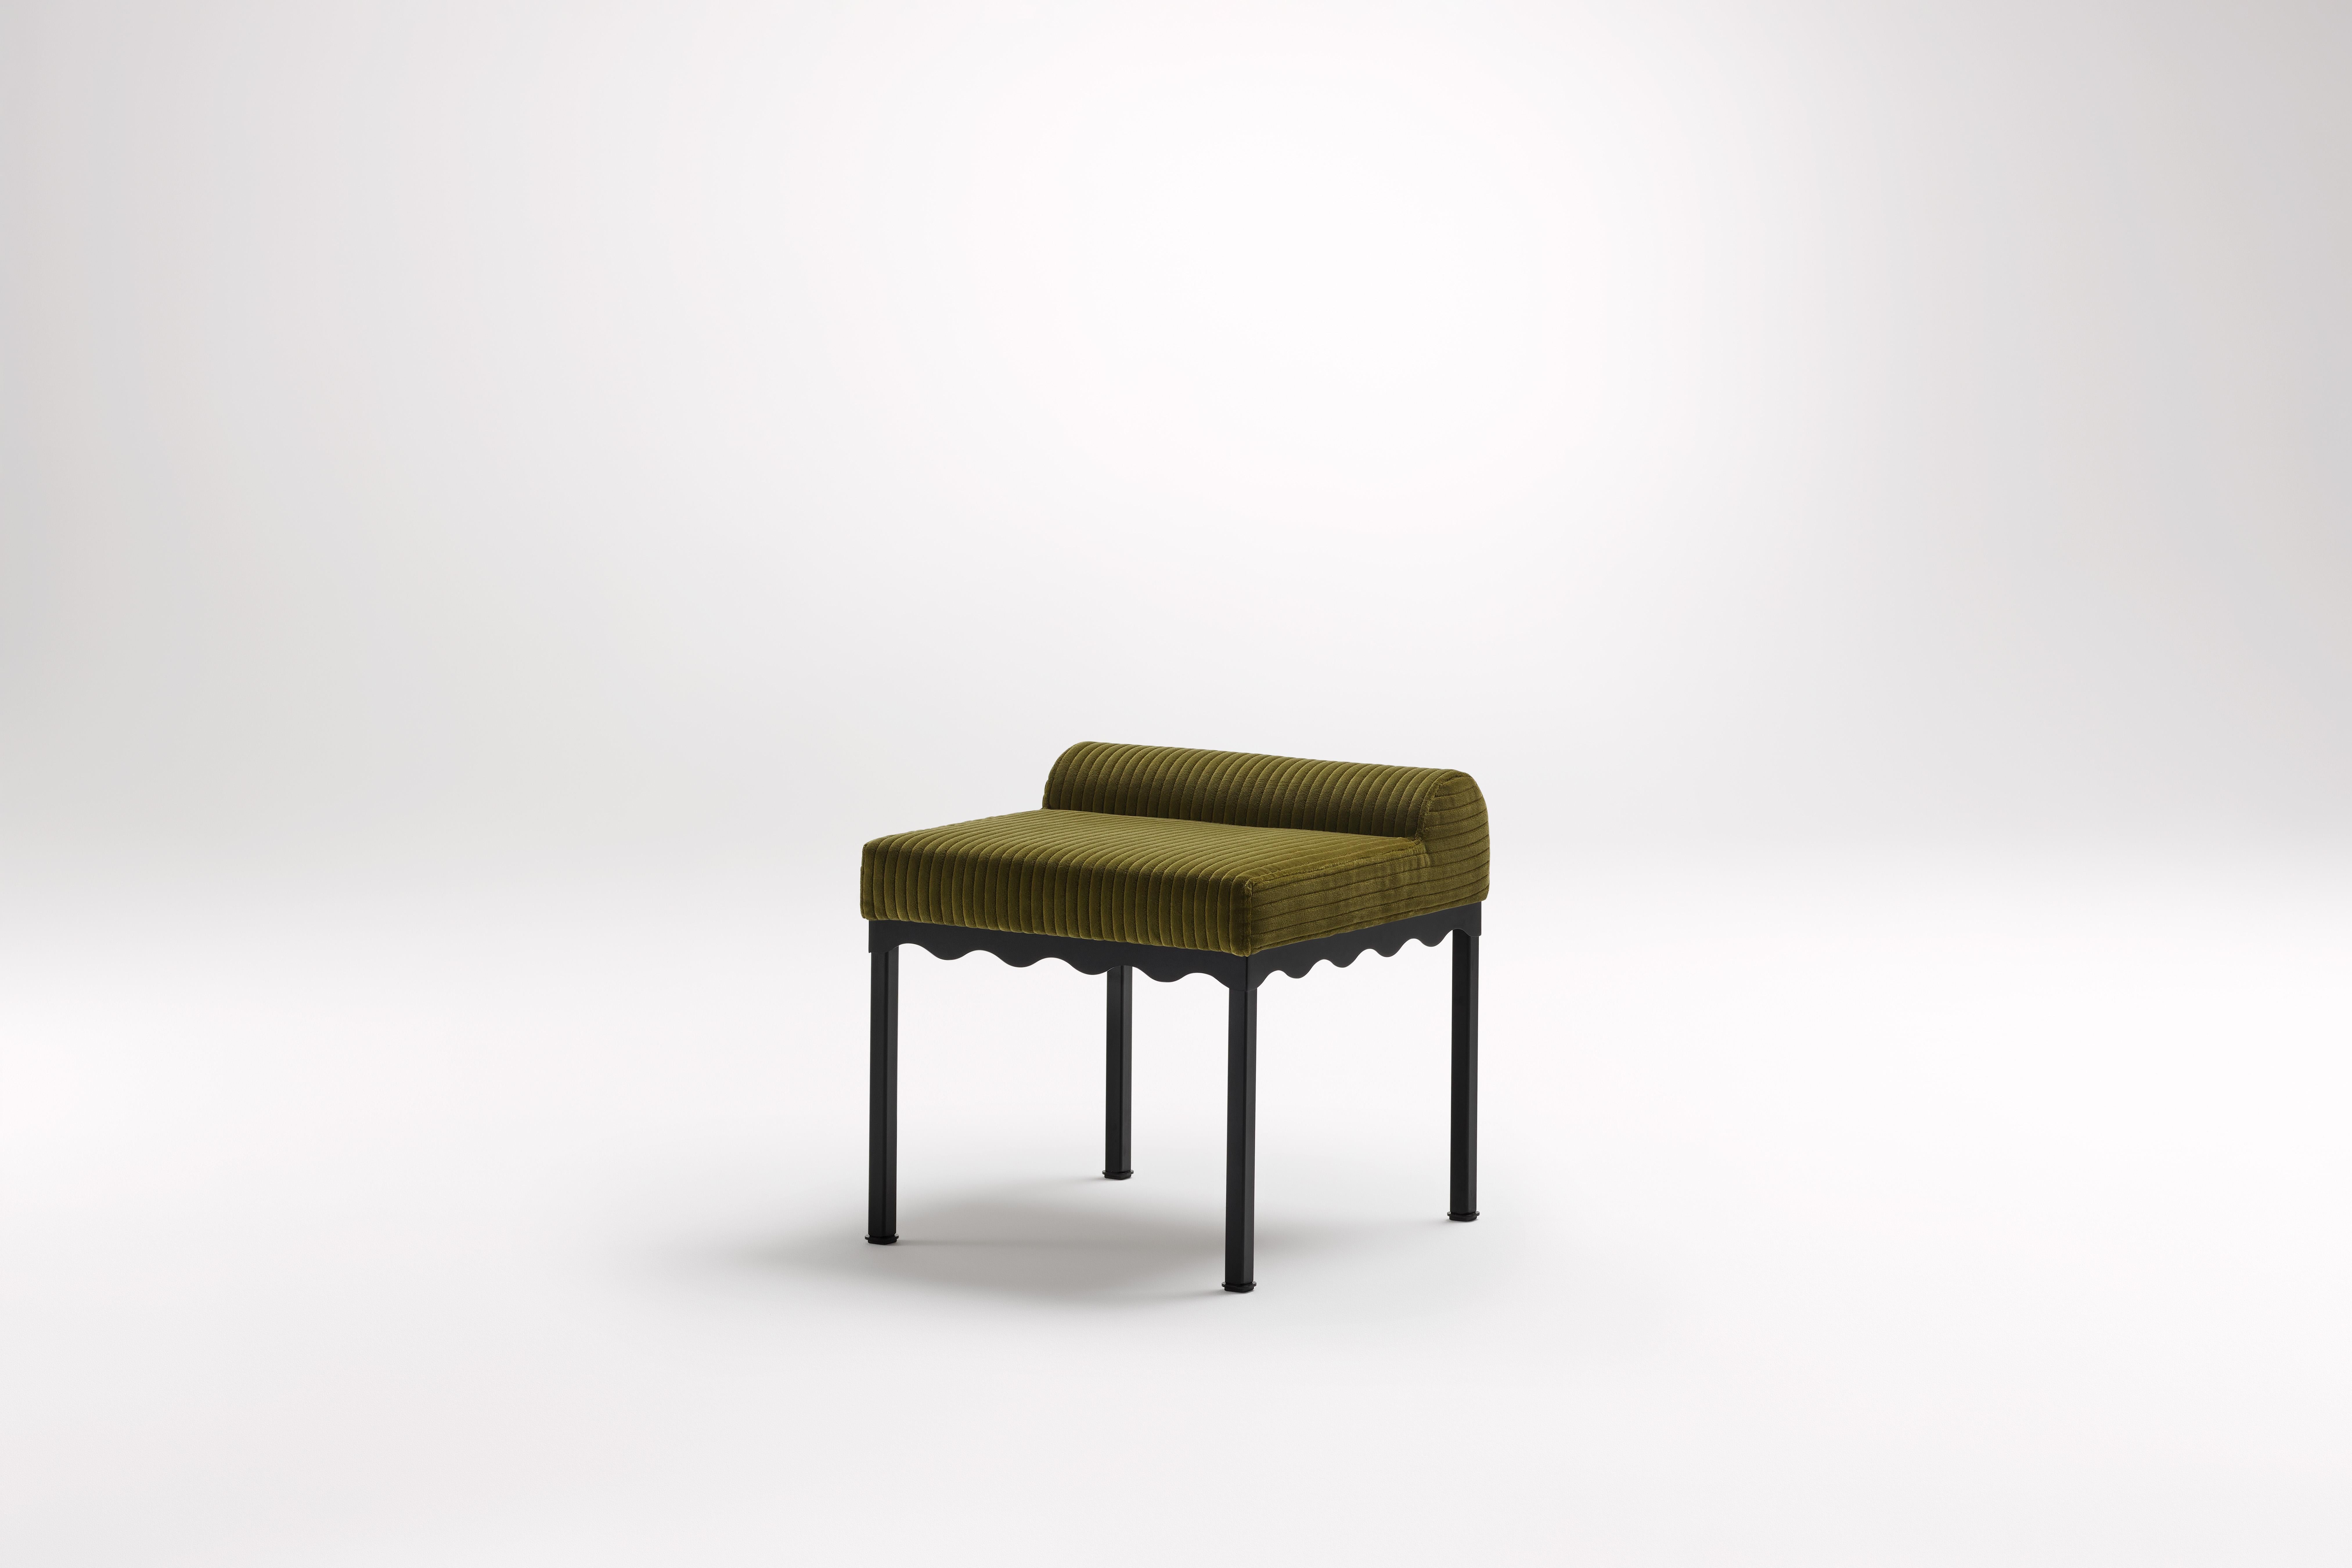 Oleander Bellini 540 Bench by Coco Flip
Dimensions: D 54 x W 54 x H 52.5 cm
Materials: Timber / Upholstered tops, Powder-coated steel frame. 
Weight: 12 kg
Frame Finishes: Textura Black.

Coco Flip is a Melbourne based furniture and lighting design